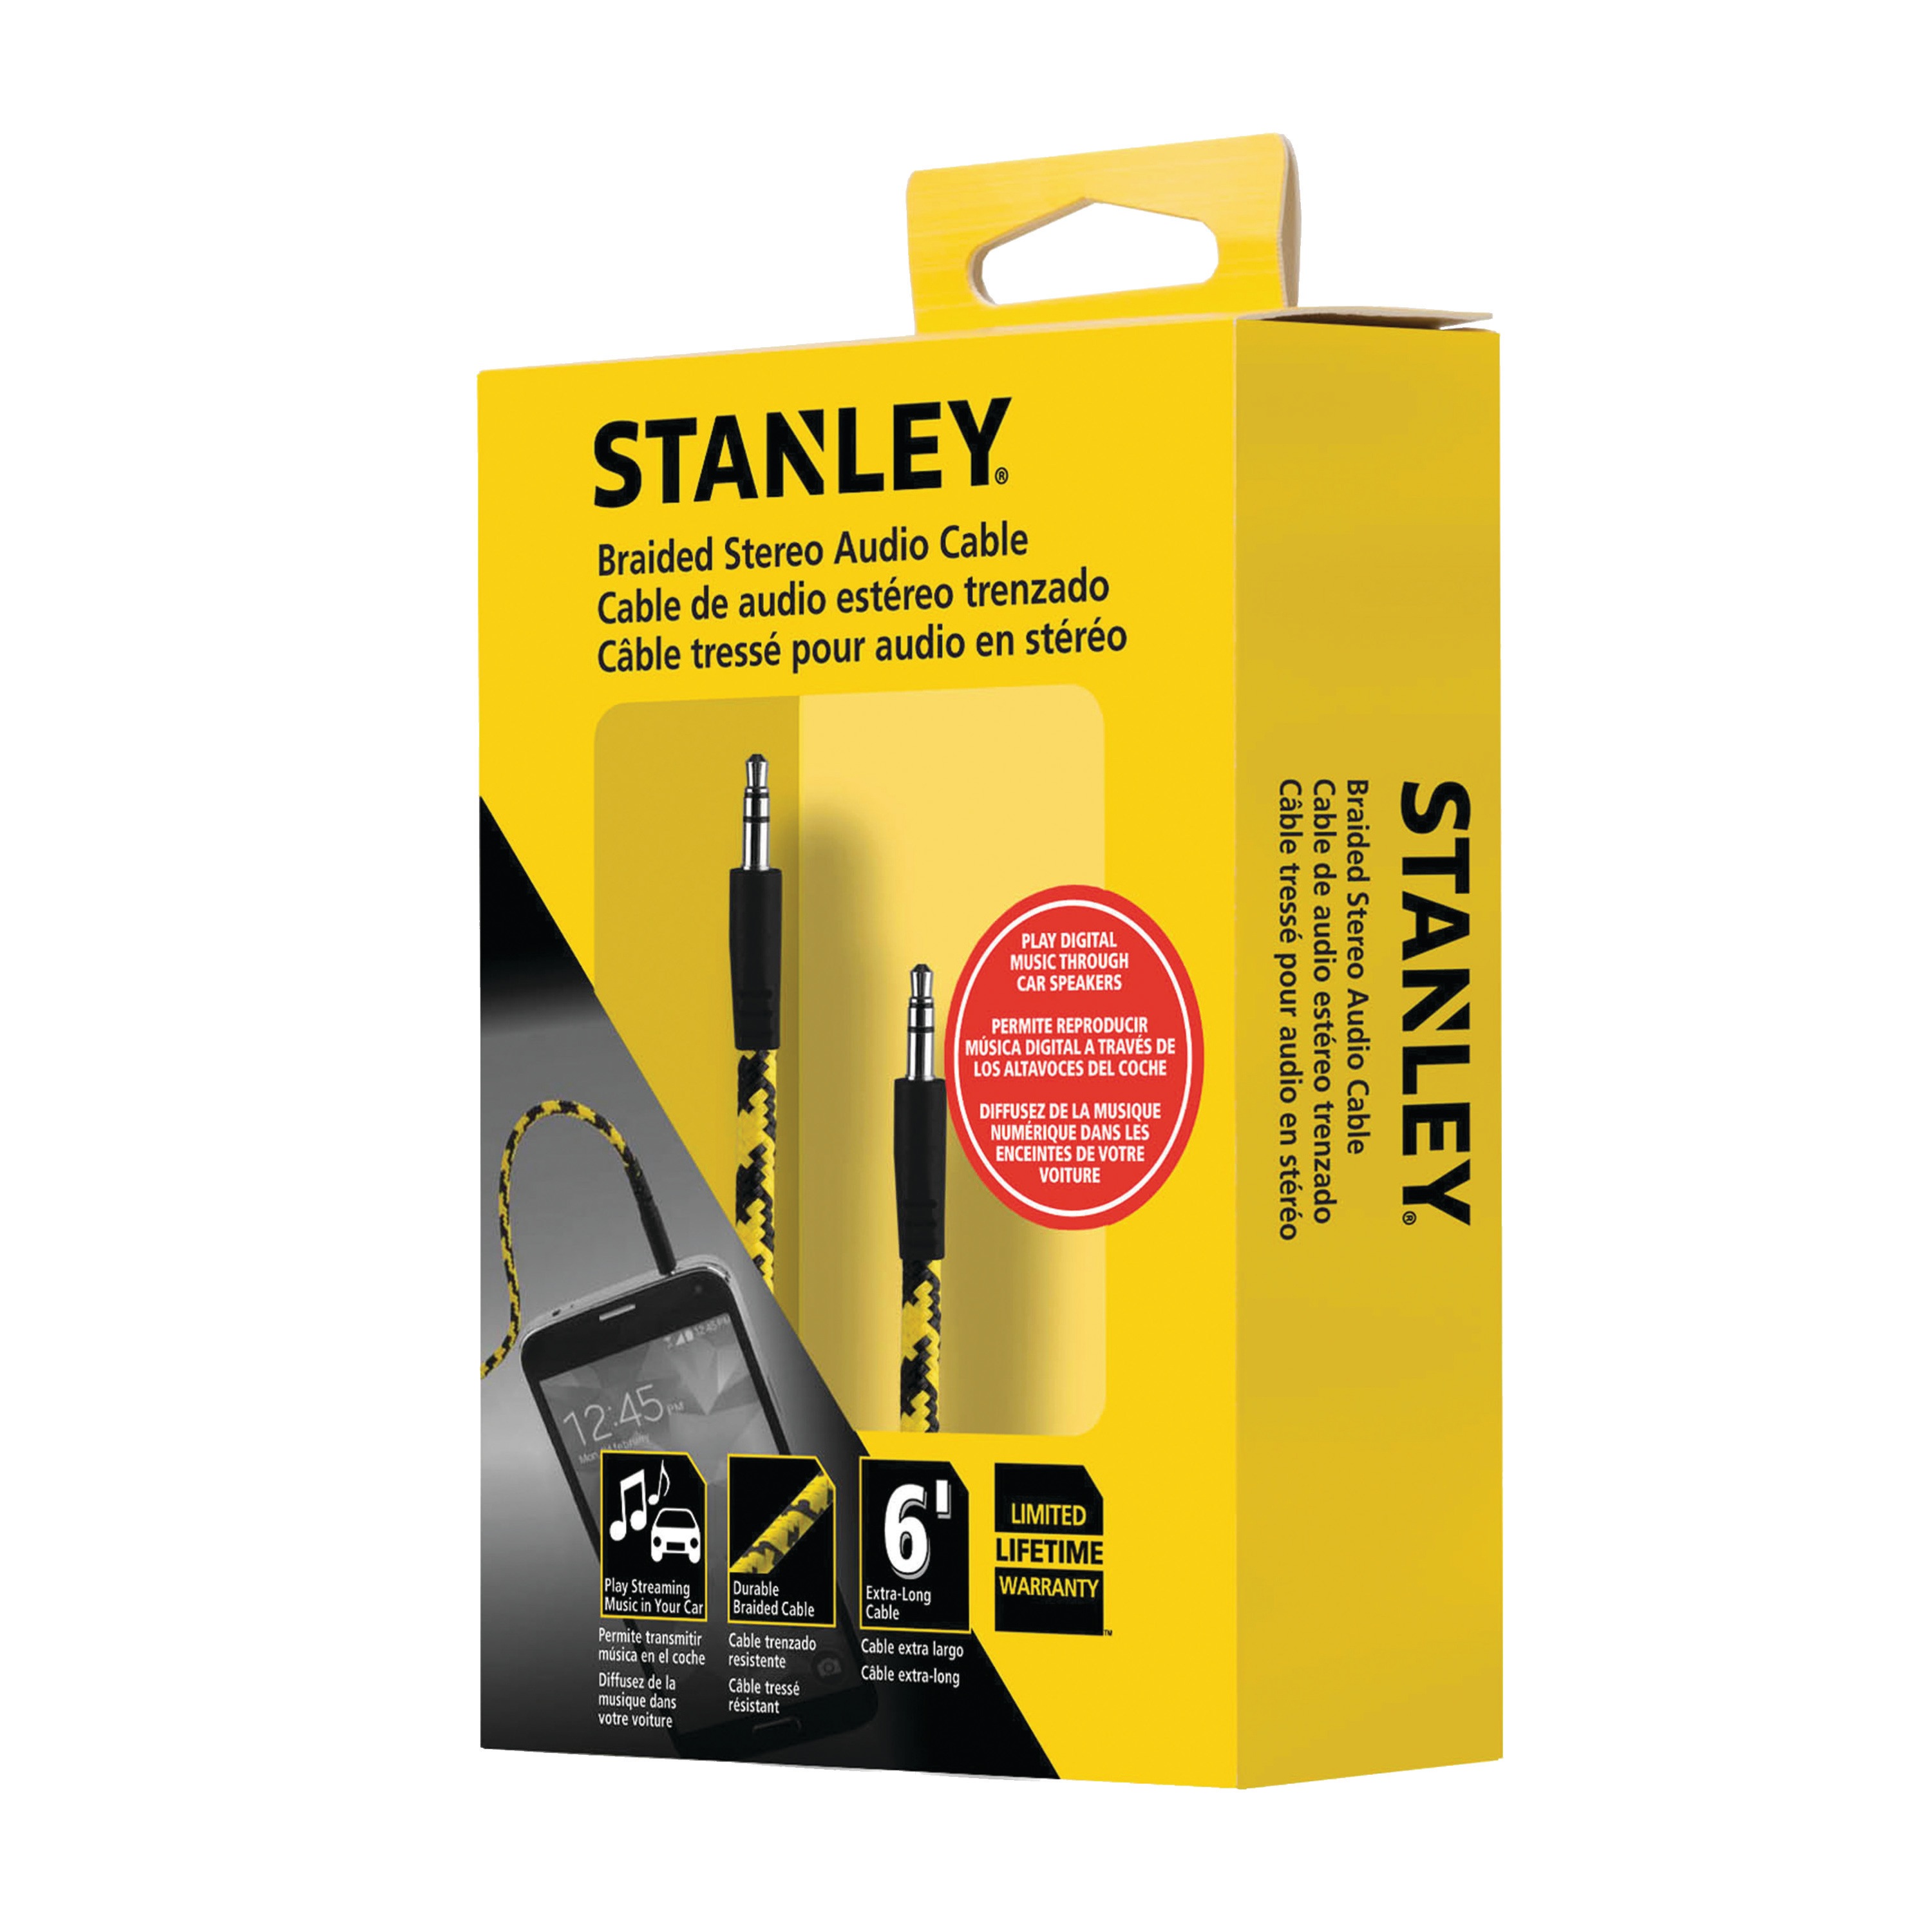 Stanley Tools - Braided Stereo Audio Cable - 1909550ST2